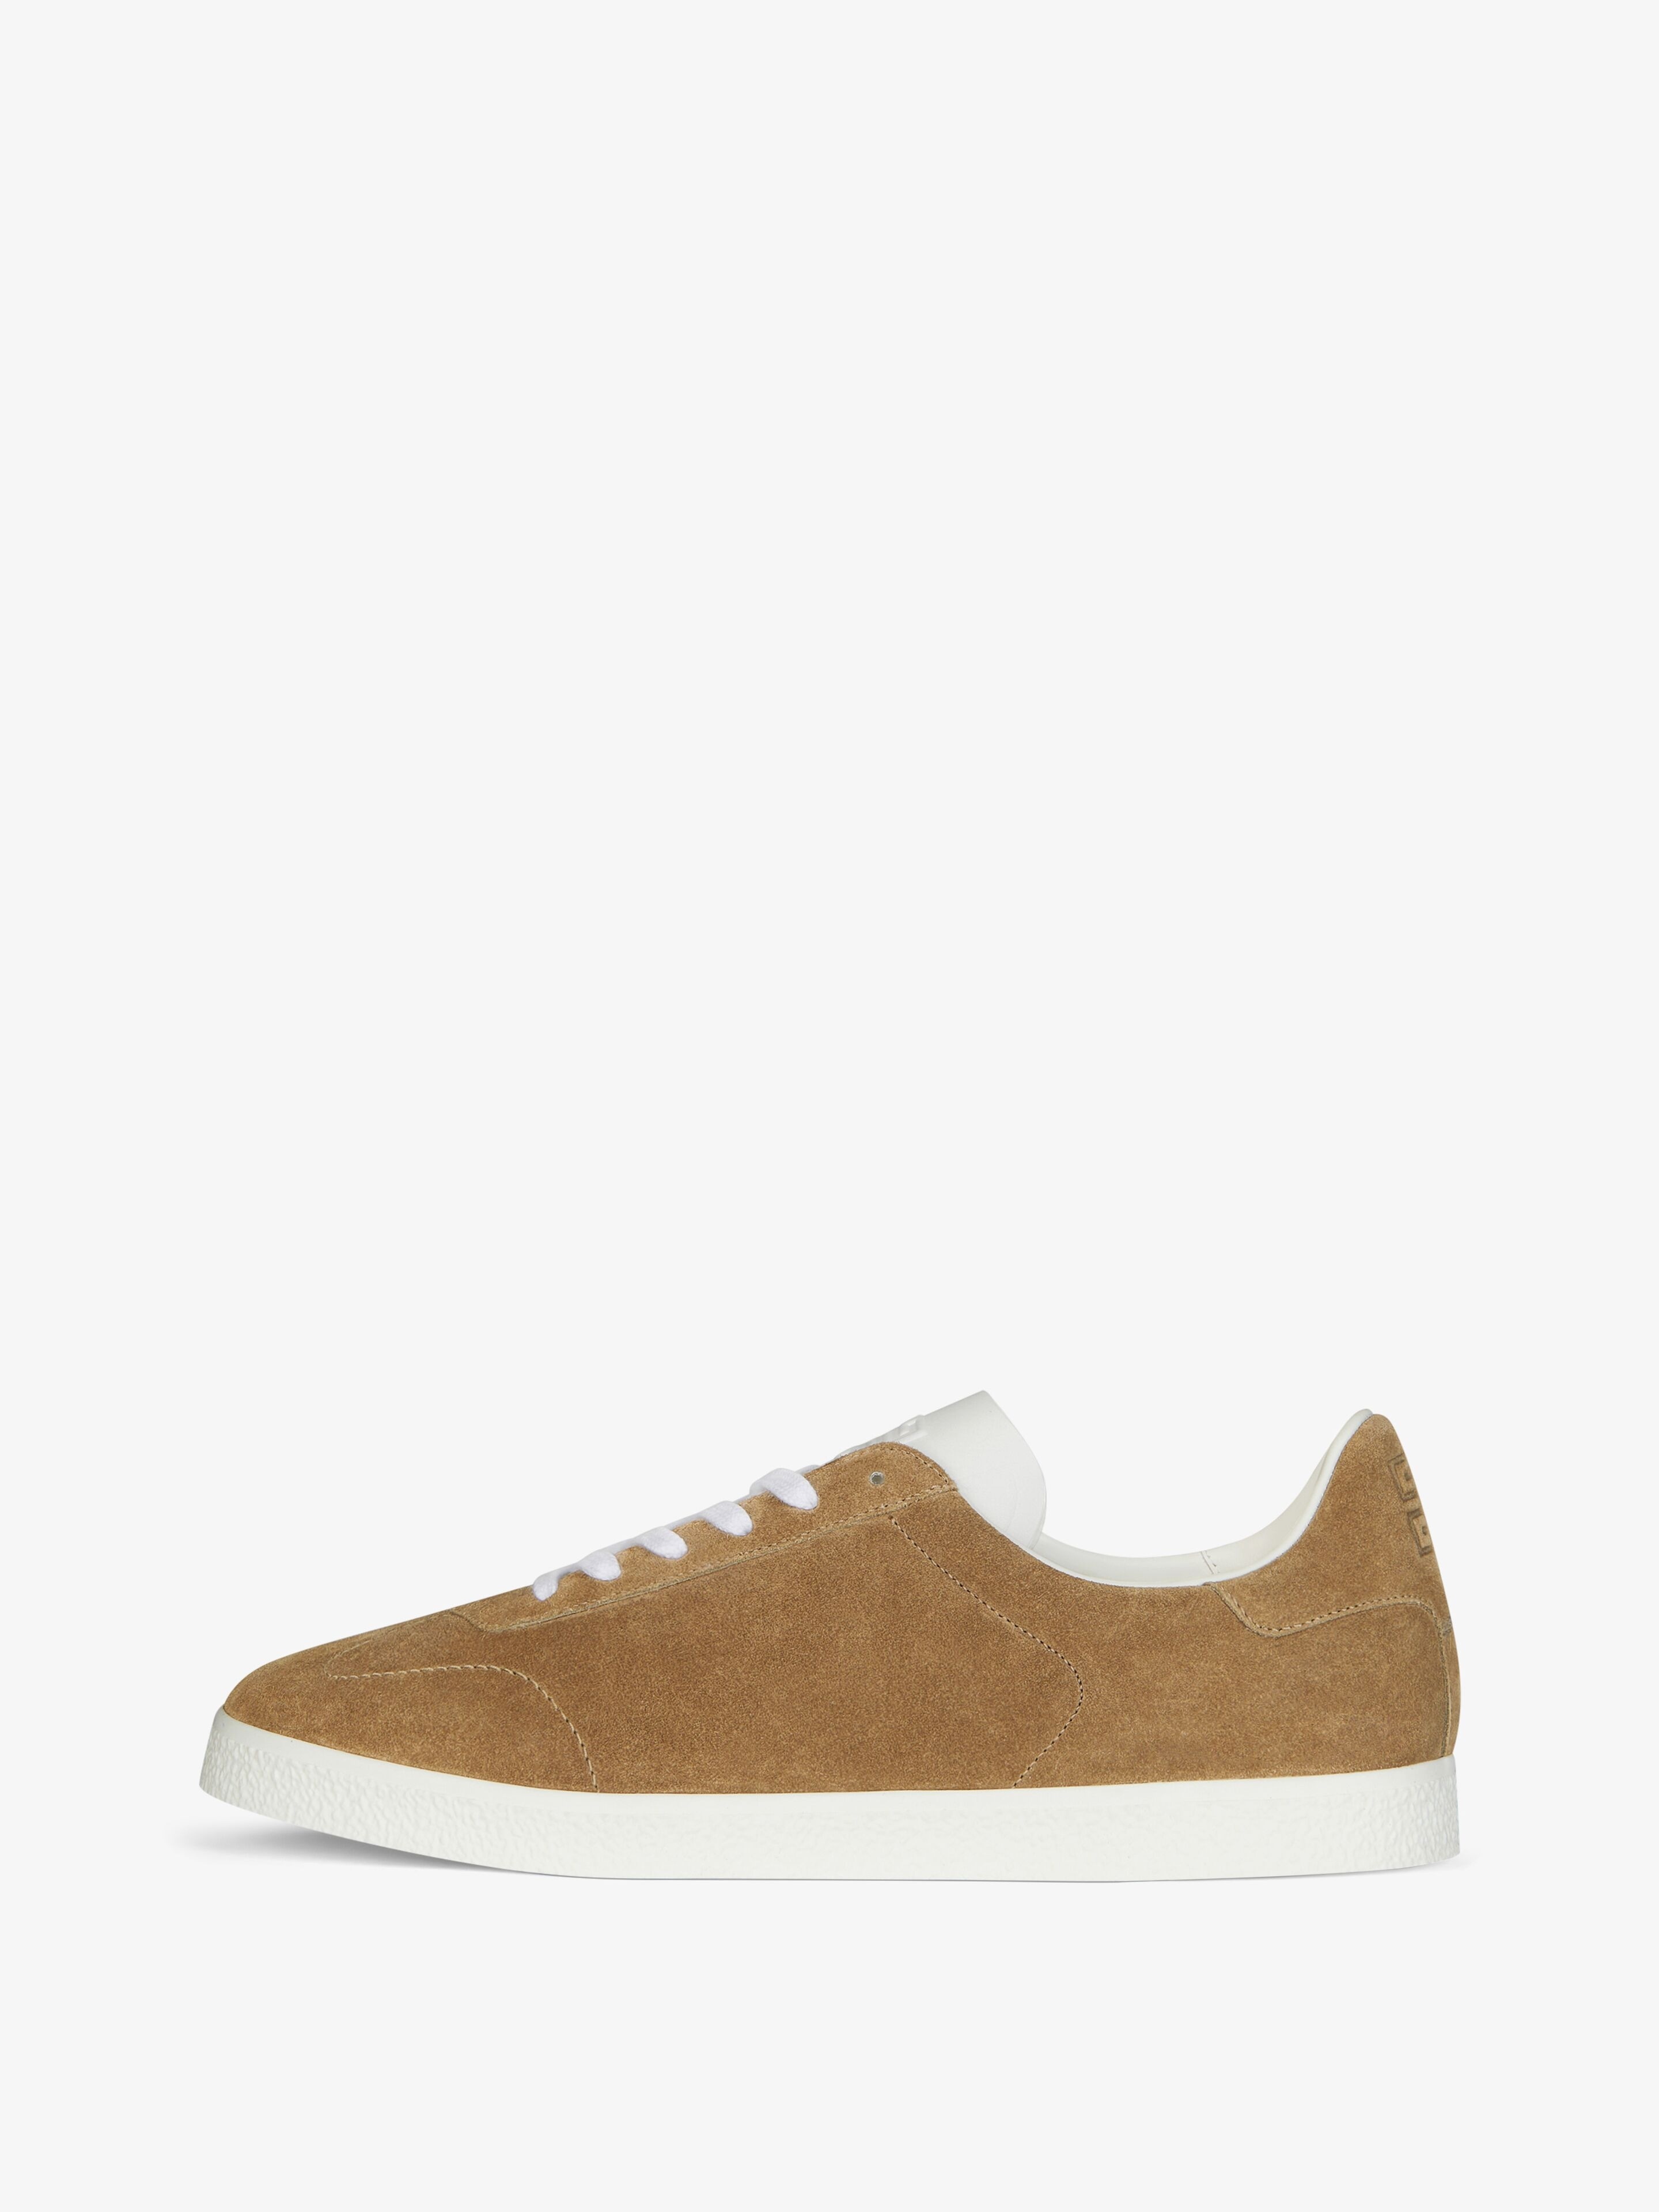 TOWN SNEAKERS IN SUEDE - 3